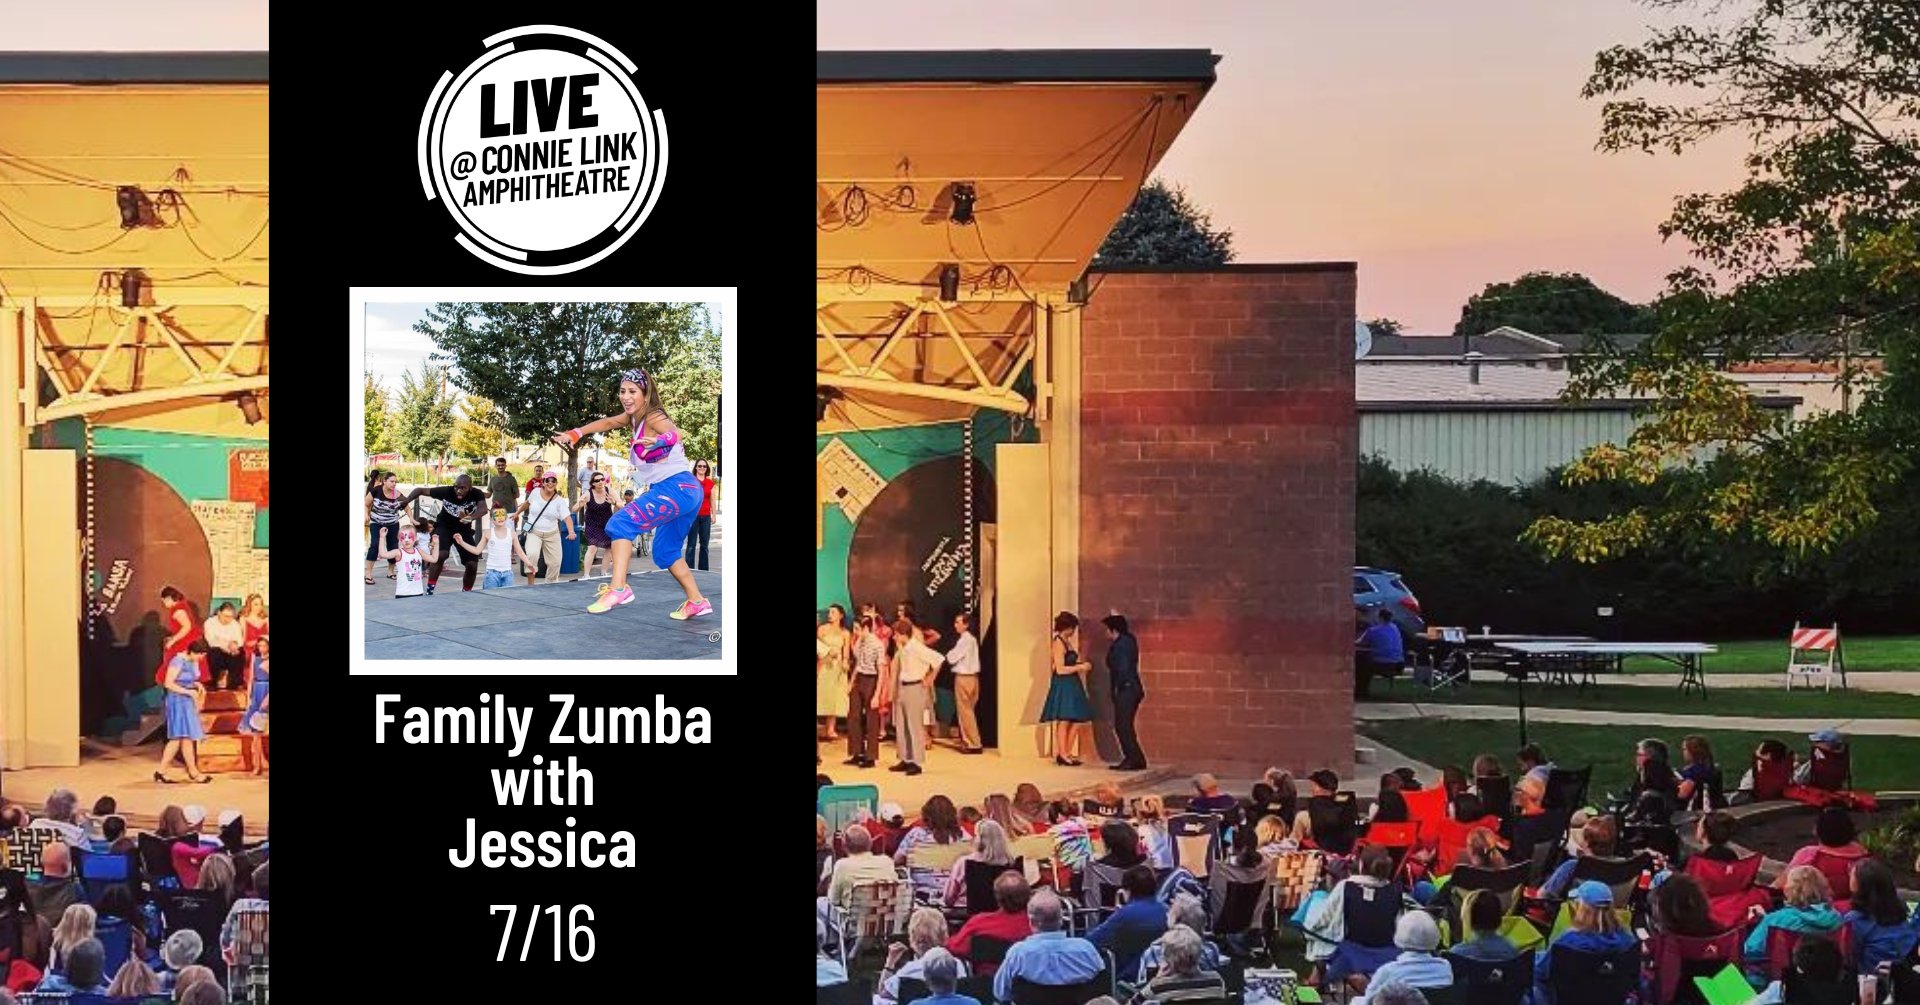 Terrific Tuesdays: Family Zumba with Jessica - Live @ Connie Link Amphitheatre